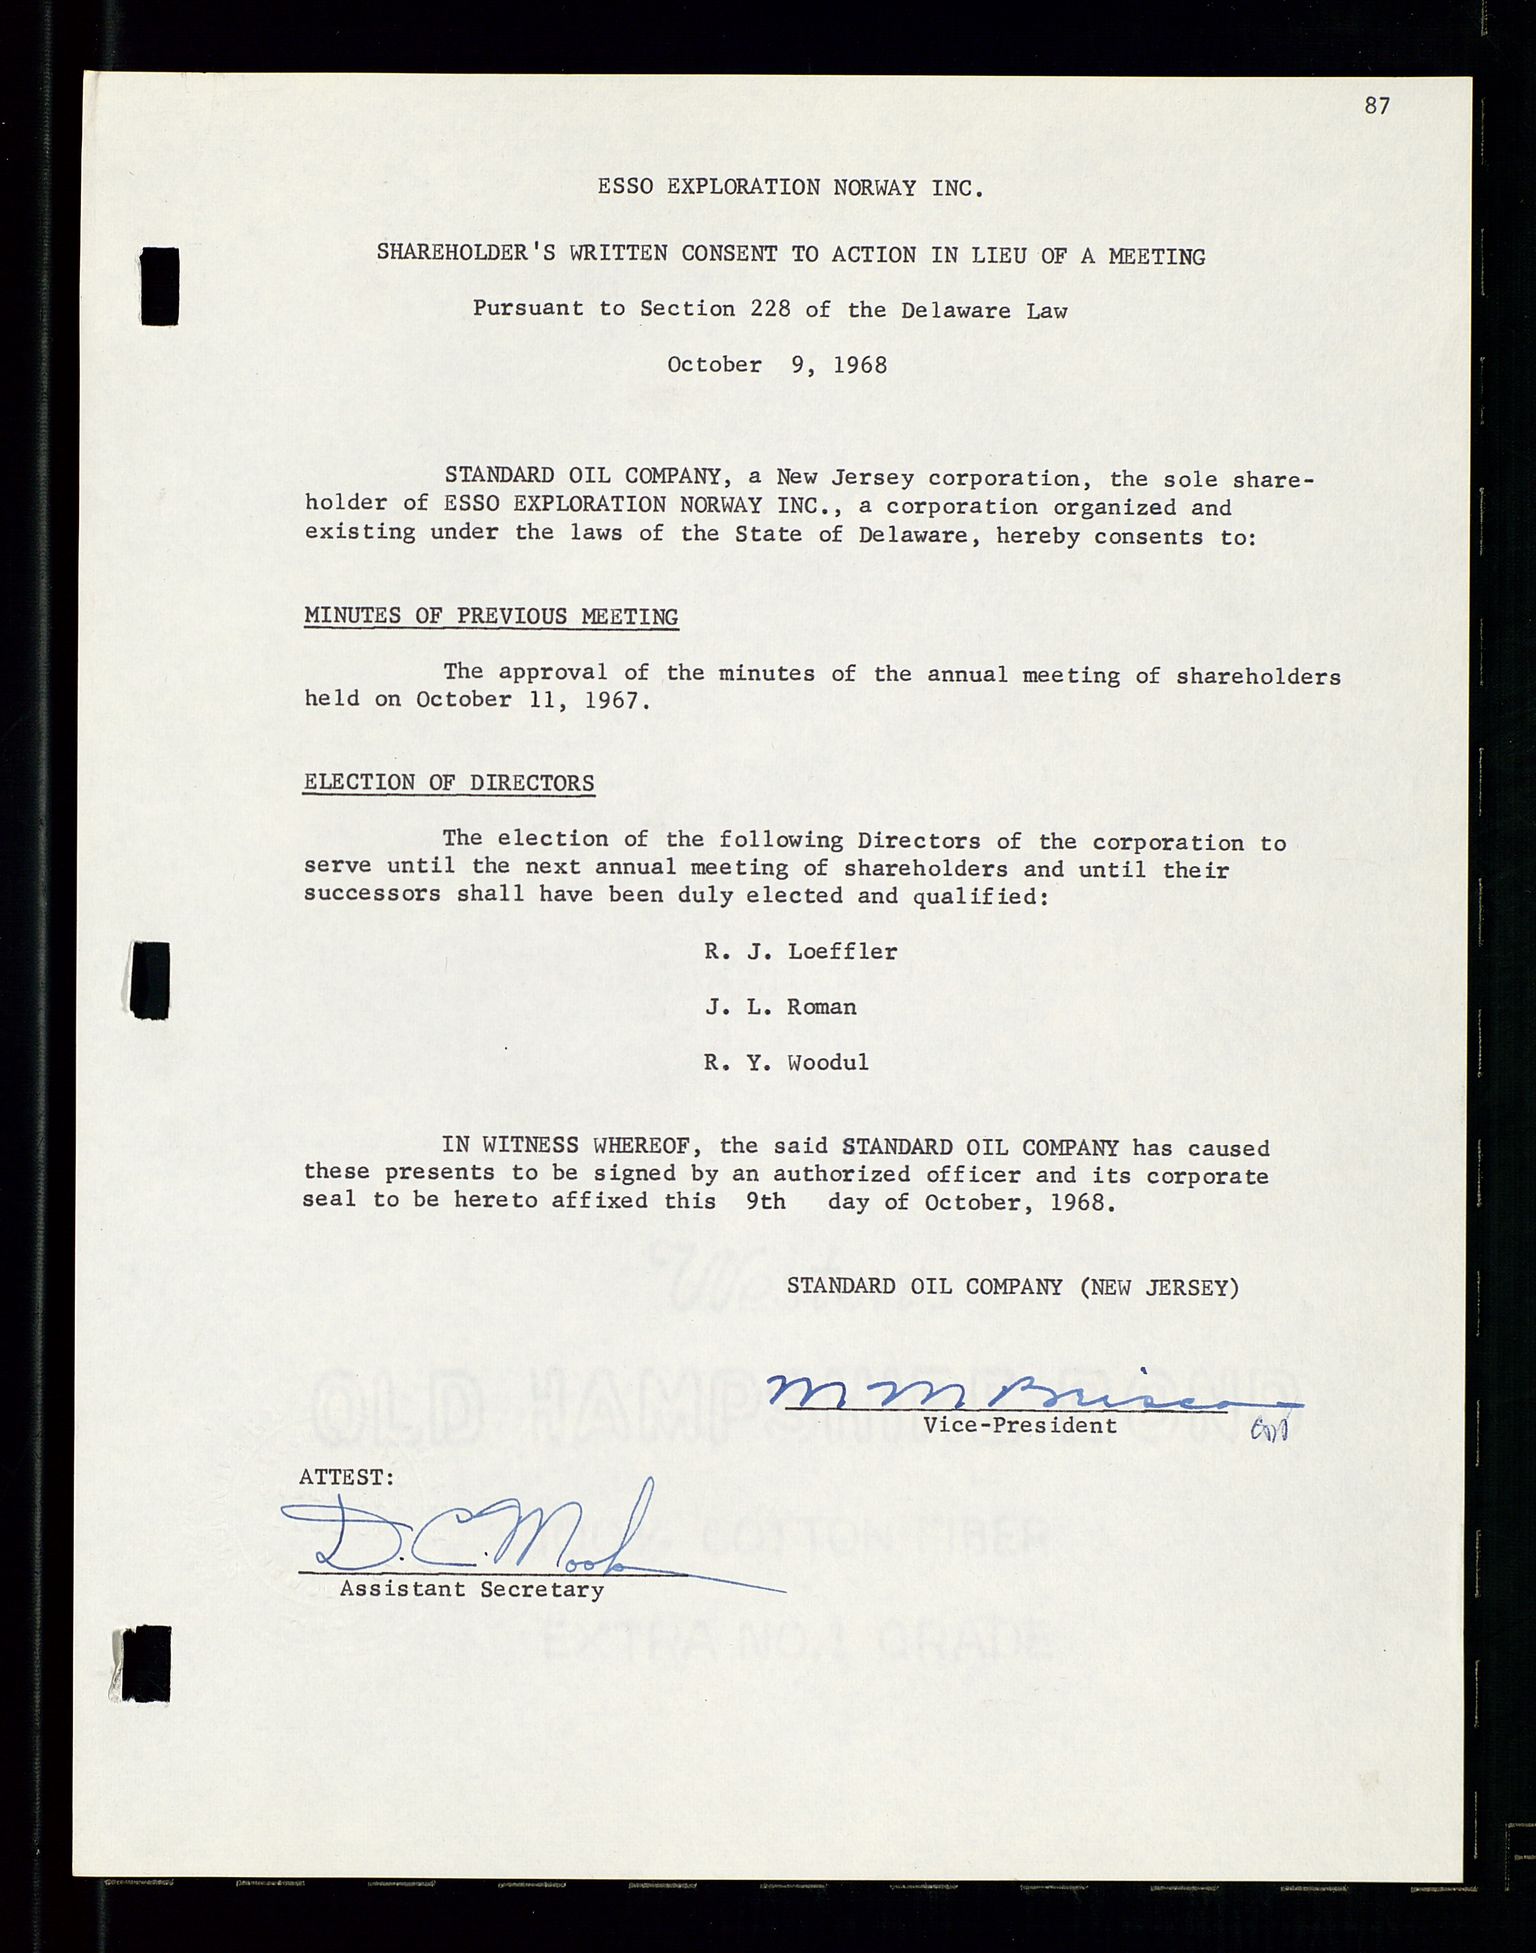 Pa 1512 - Esso Exploration and Production Norway Inc., SAST/A-101917/A/Aa/L0001/0001: Styredokumenter / Corporate records, By-Laws, Board meeting minutes, Incorporations, 1965-1975, p. 87